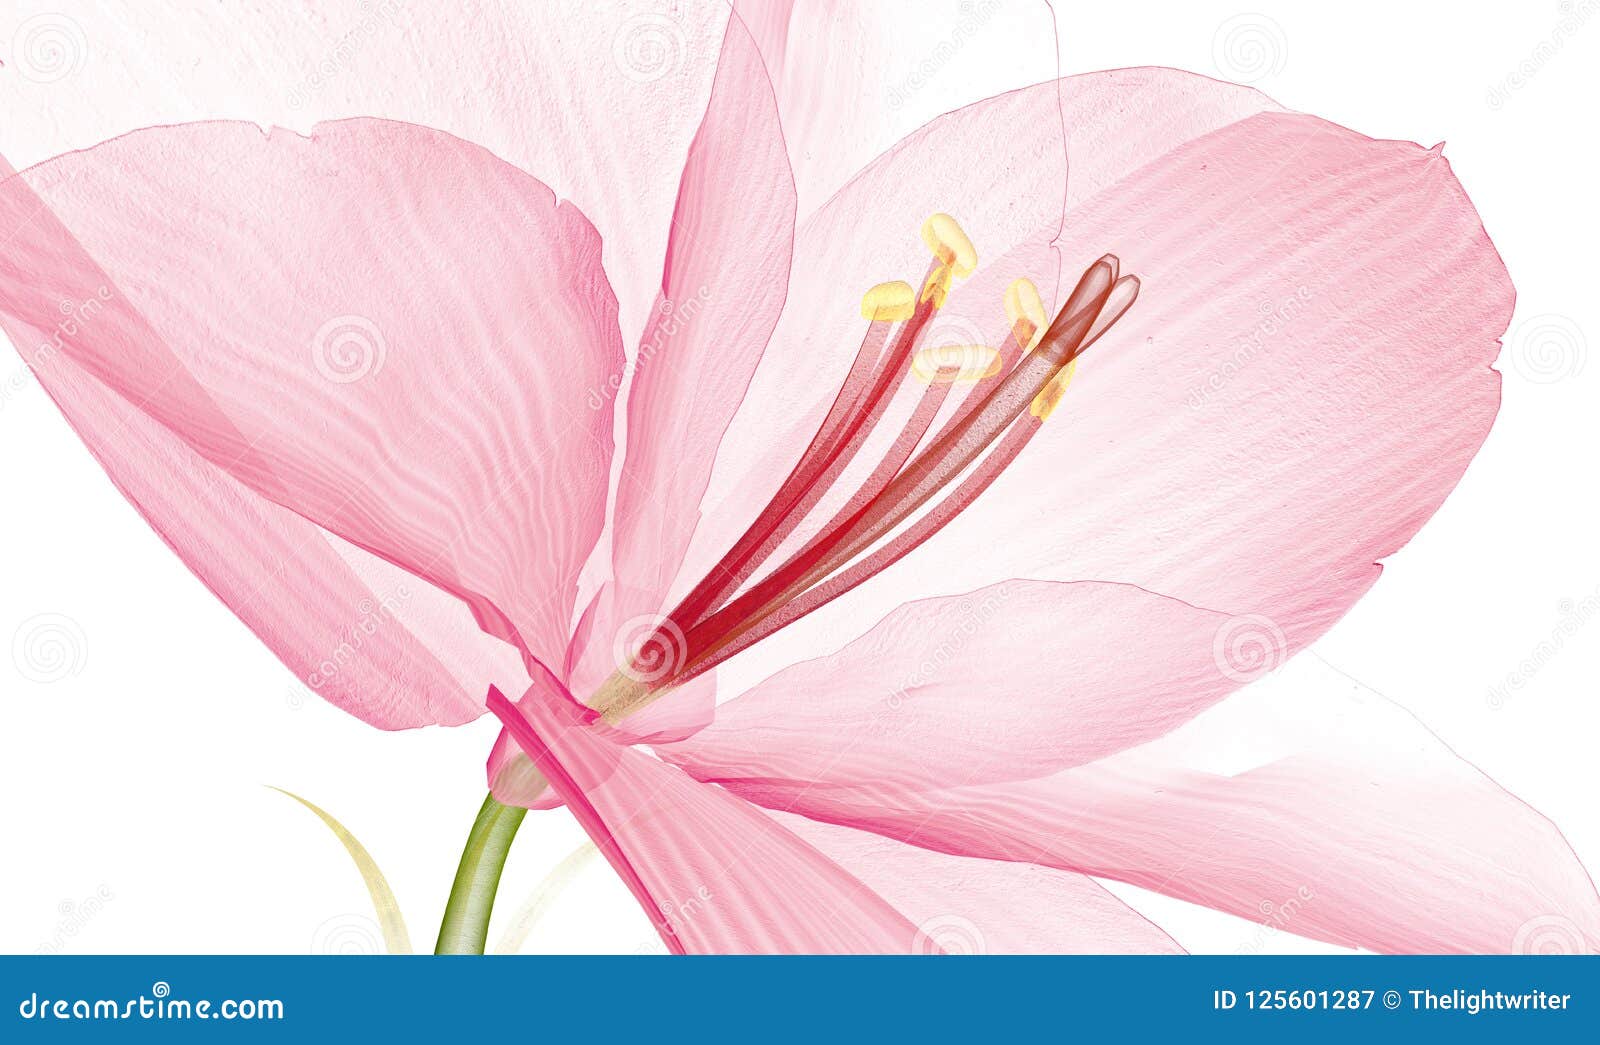 Download X-ray Image Of A Flower Isolated On White, The Ameryllis ...